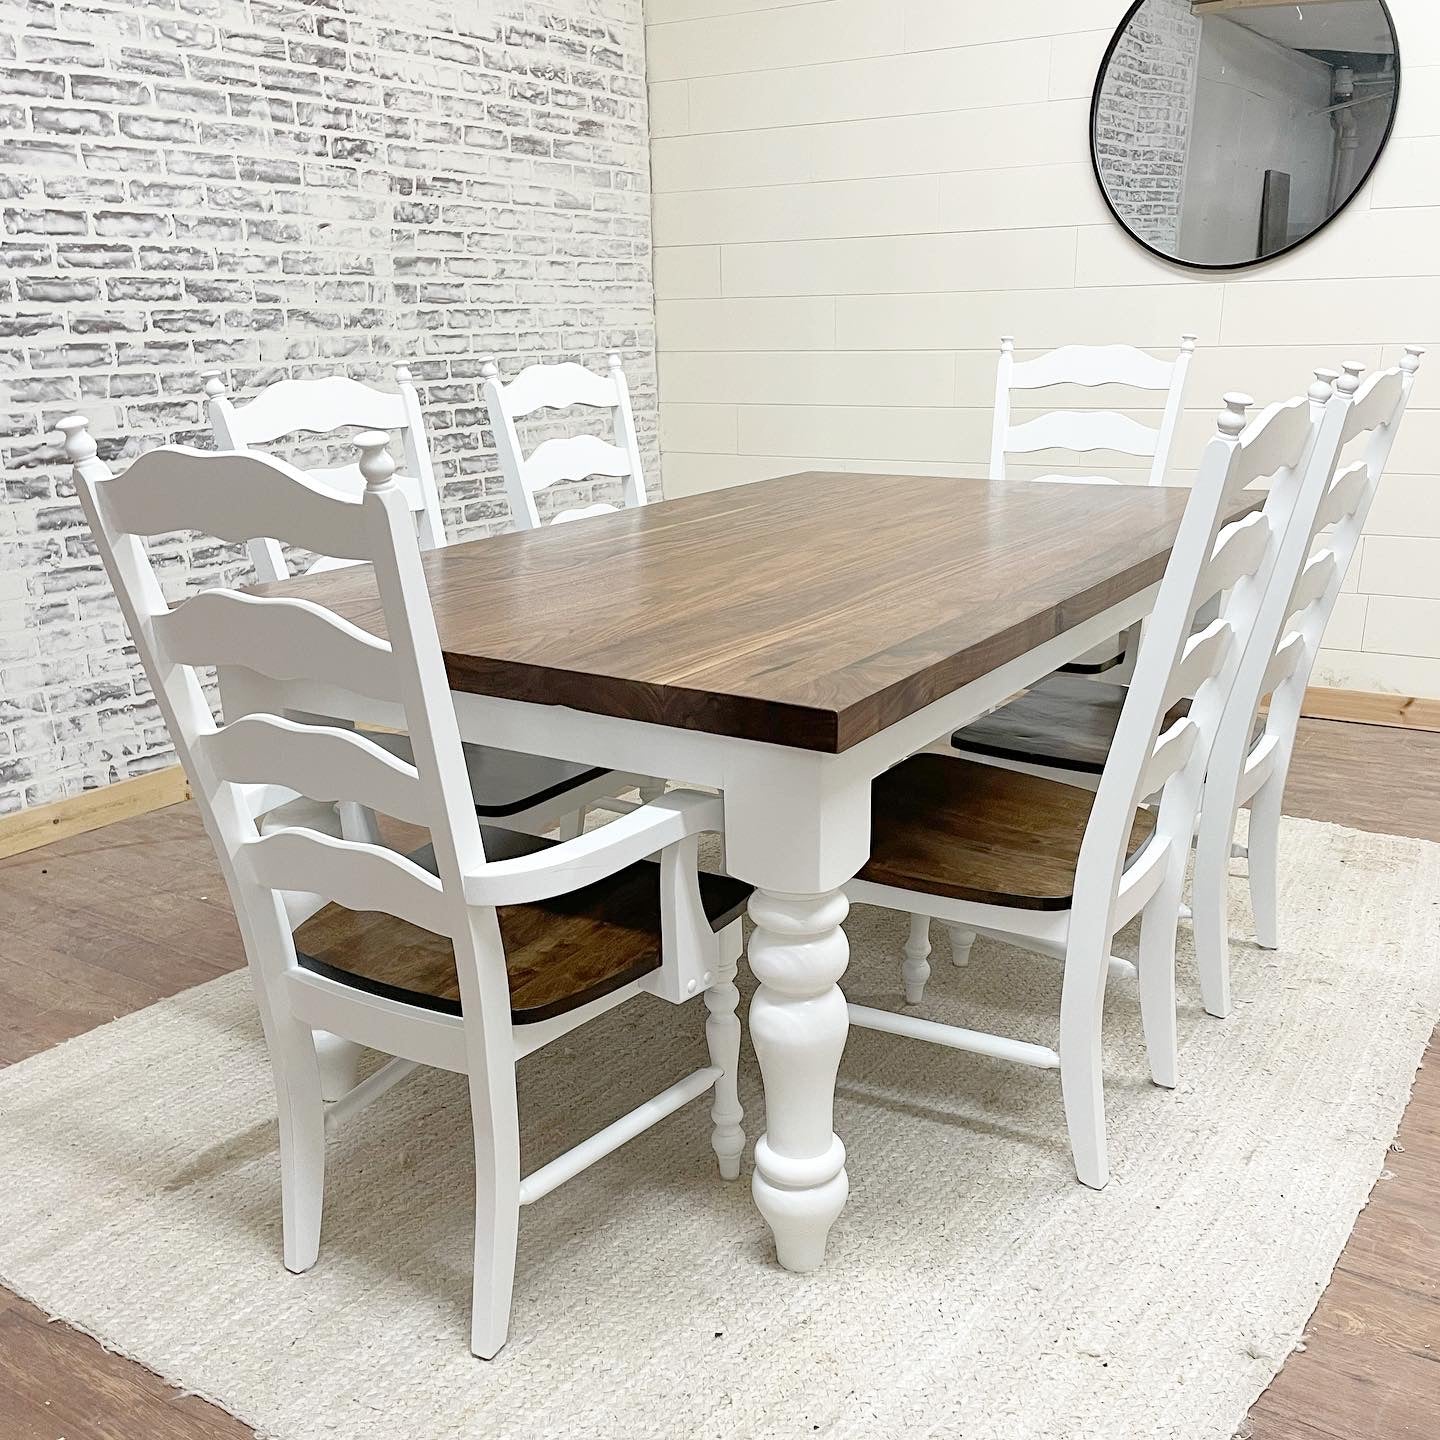 Pictured with a 6'L x 42" W Walnut top with a Natural finish and a painted White base. Pictured with 4 Maine Ladder Back Chairs and two Captain Chairs.